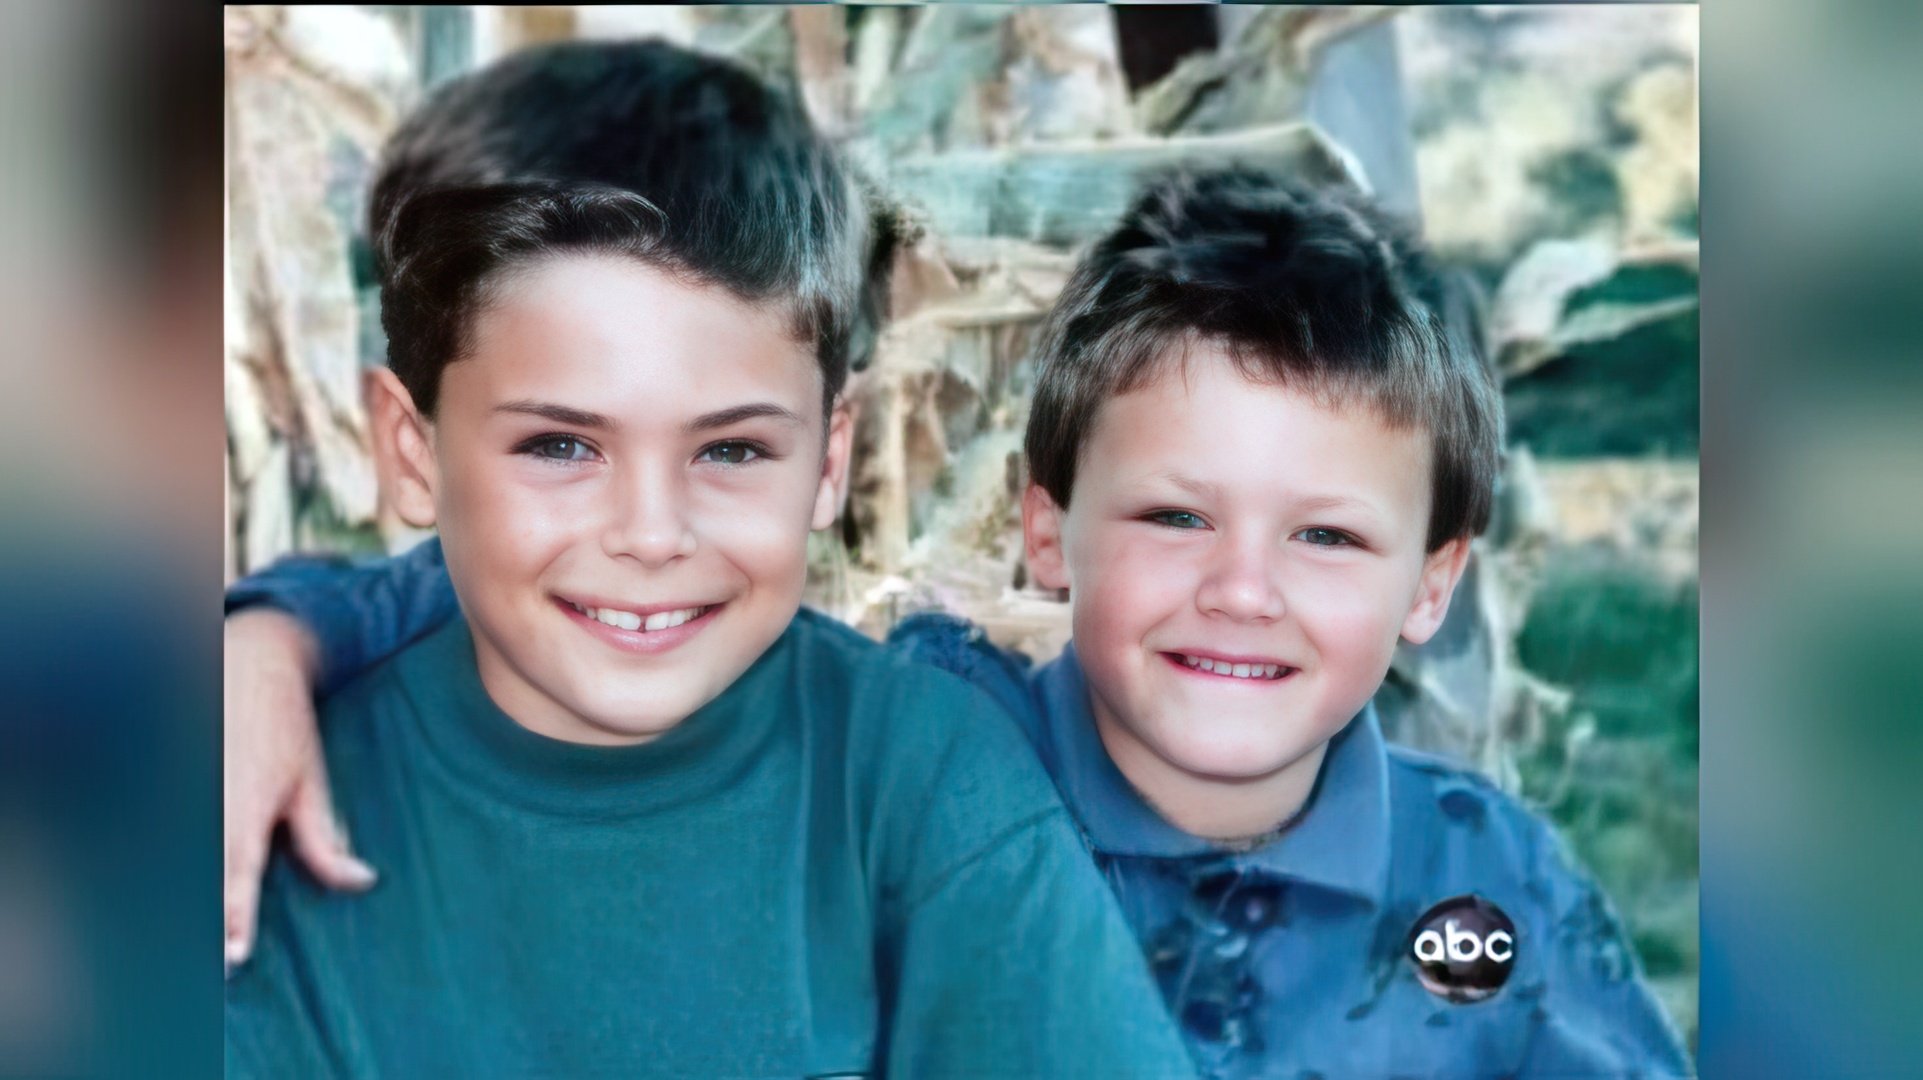 Little Zac Efron with his younger brother Dylan